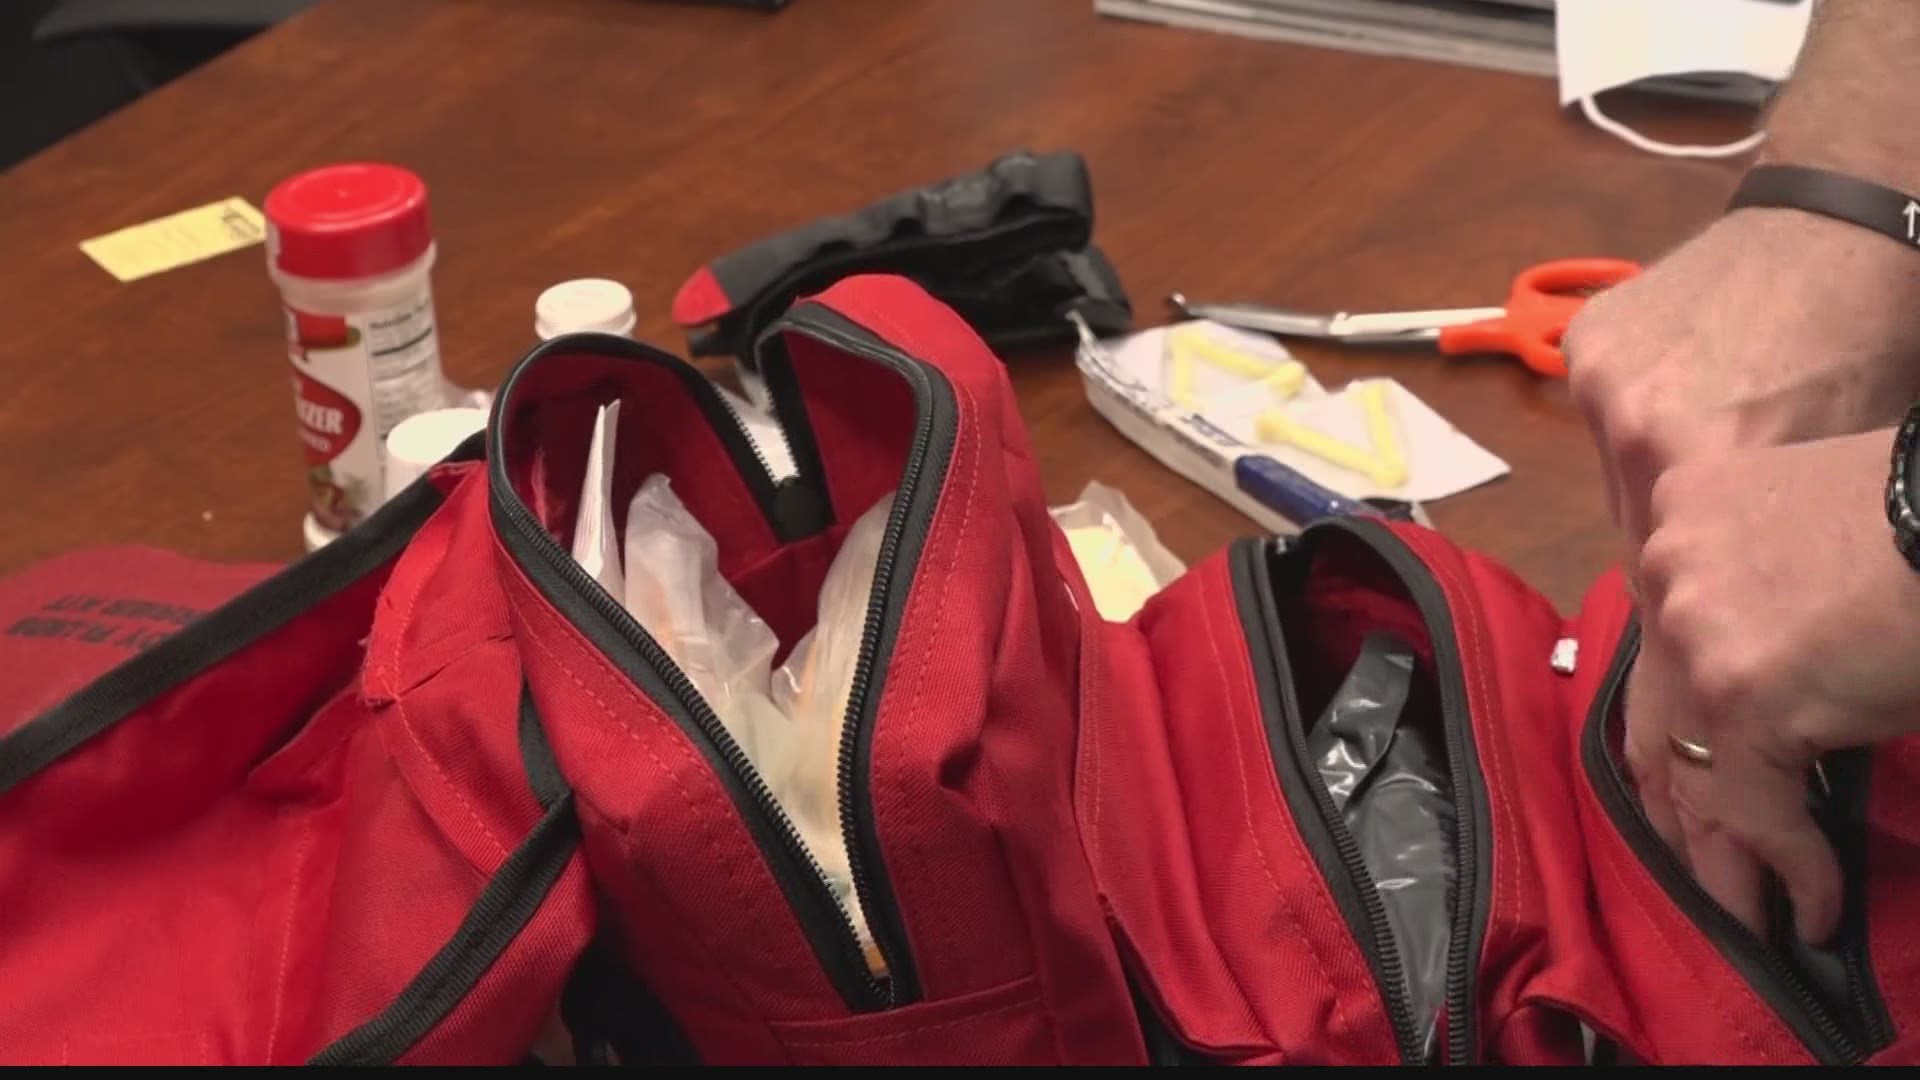 A local security and defense training company wants to educate people on how to properly use everything inside of a first-aid kit and emergency preparedness.